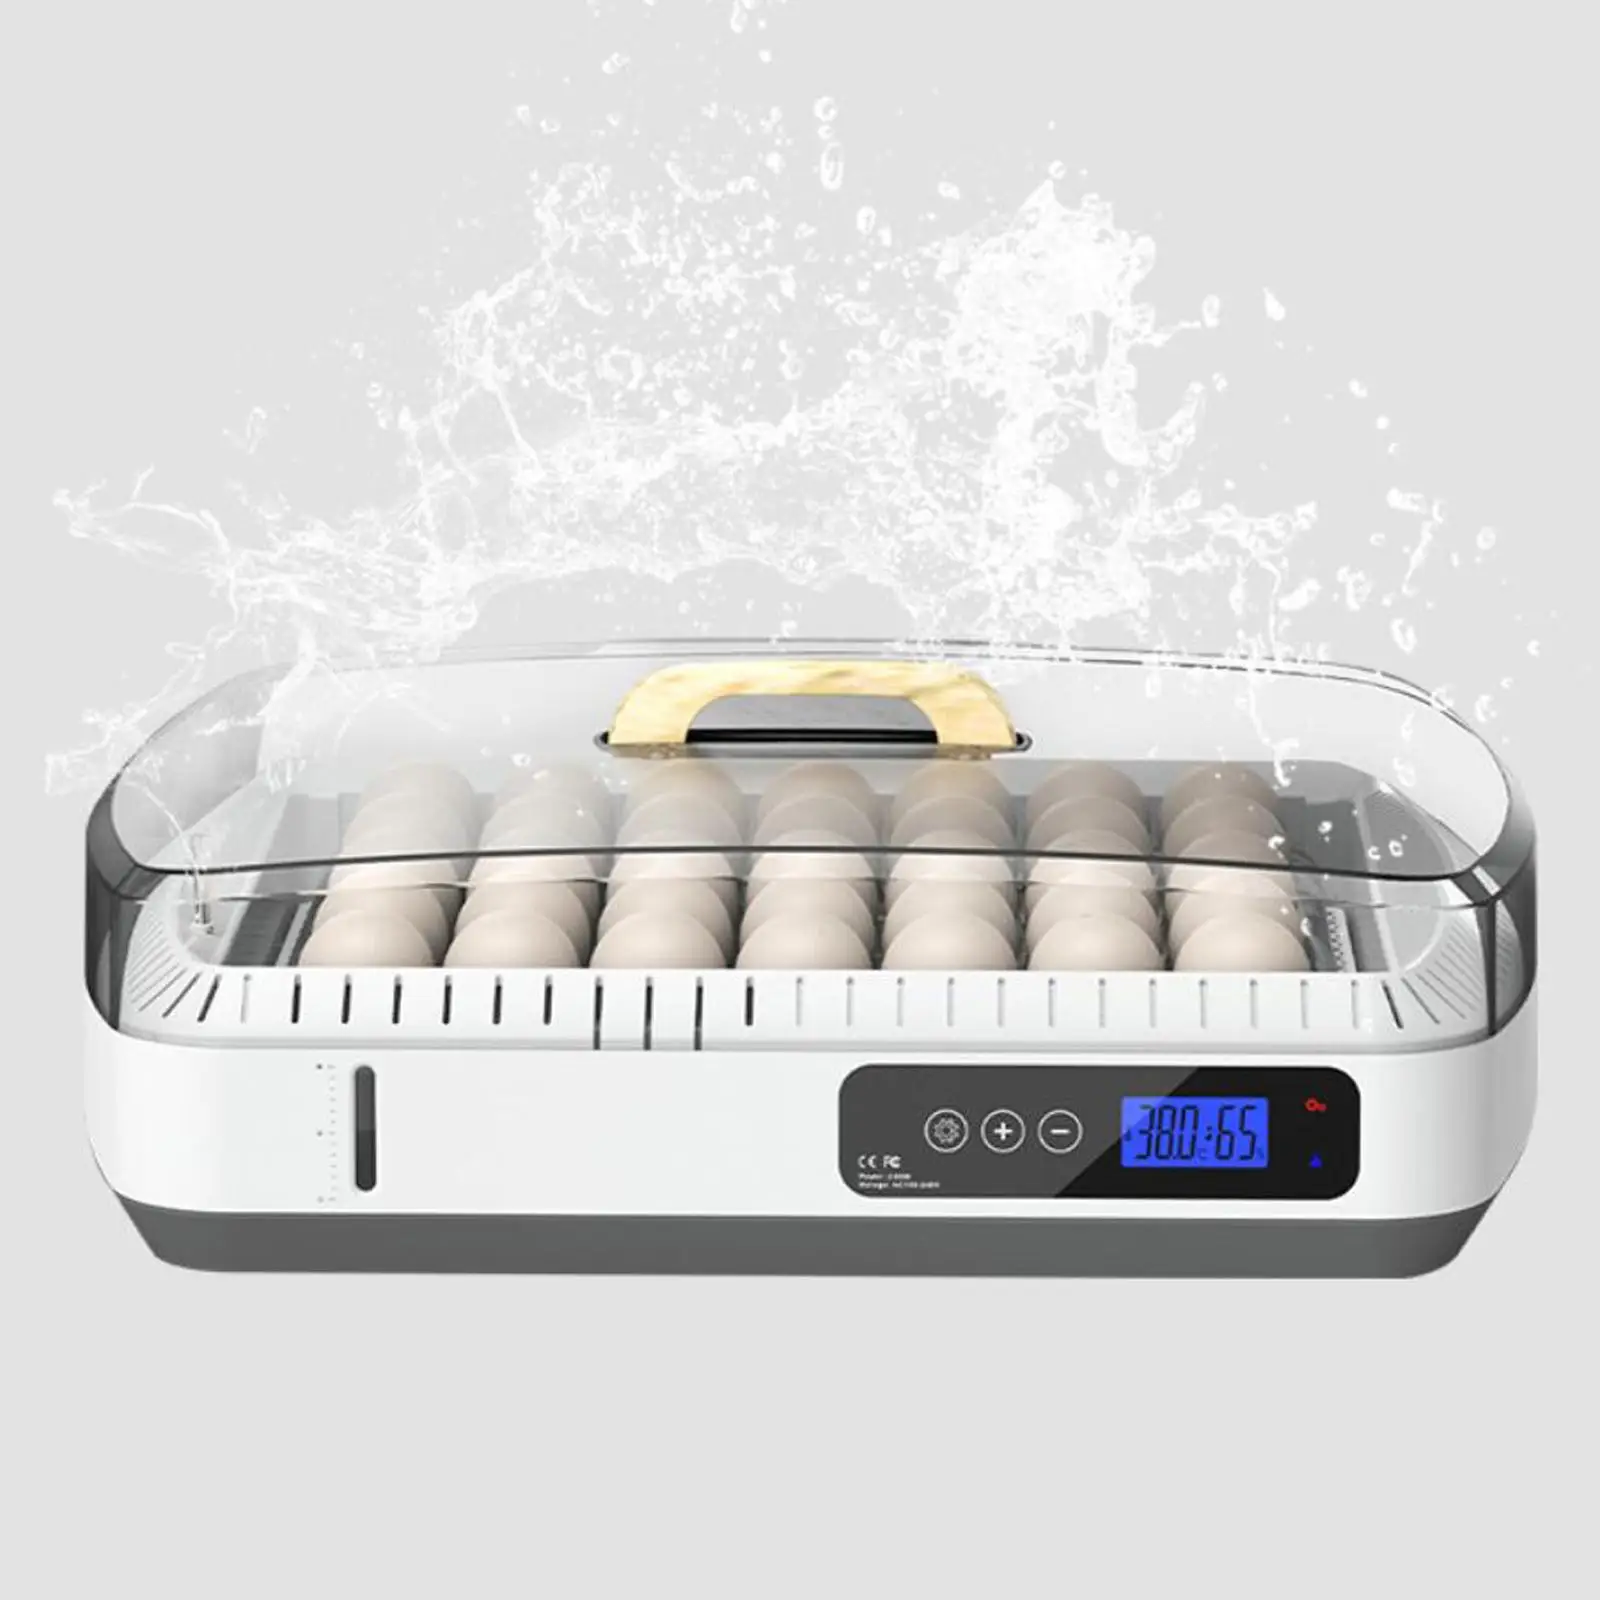 Digital Automatic Egg Incubator Anti Drying Burning Auto Turner 35Eggs Poultry Hatcher Machine for Eggs Duck Bird  Hatching